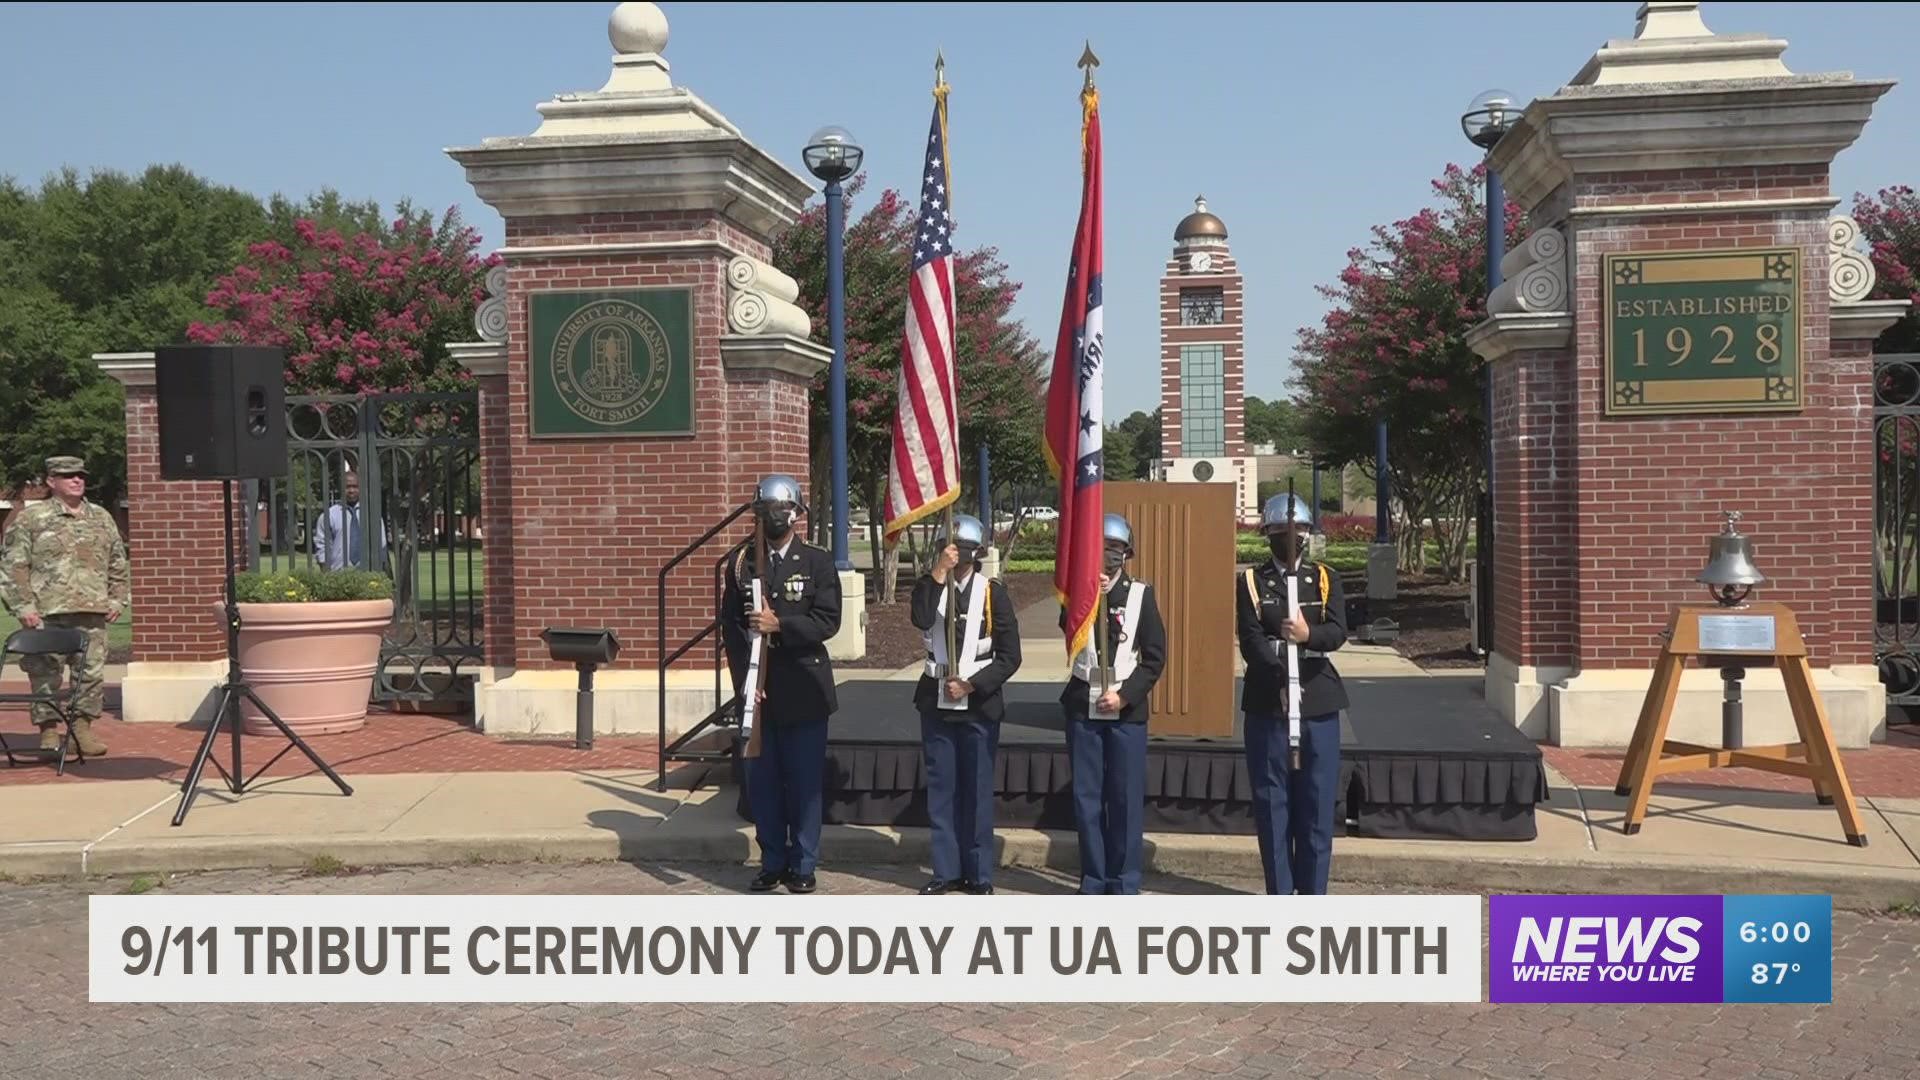 UAFS has been holding events all week to mark the 20th anniversary of the attacks.